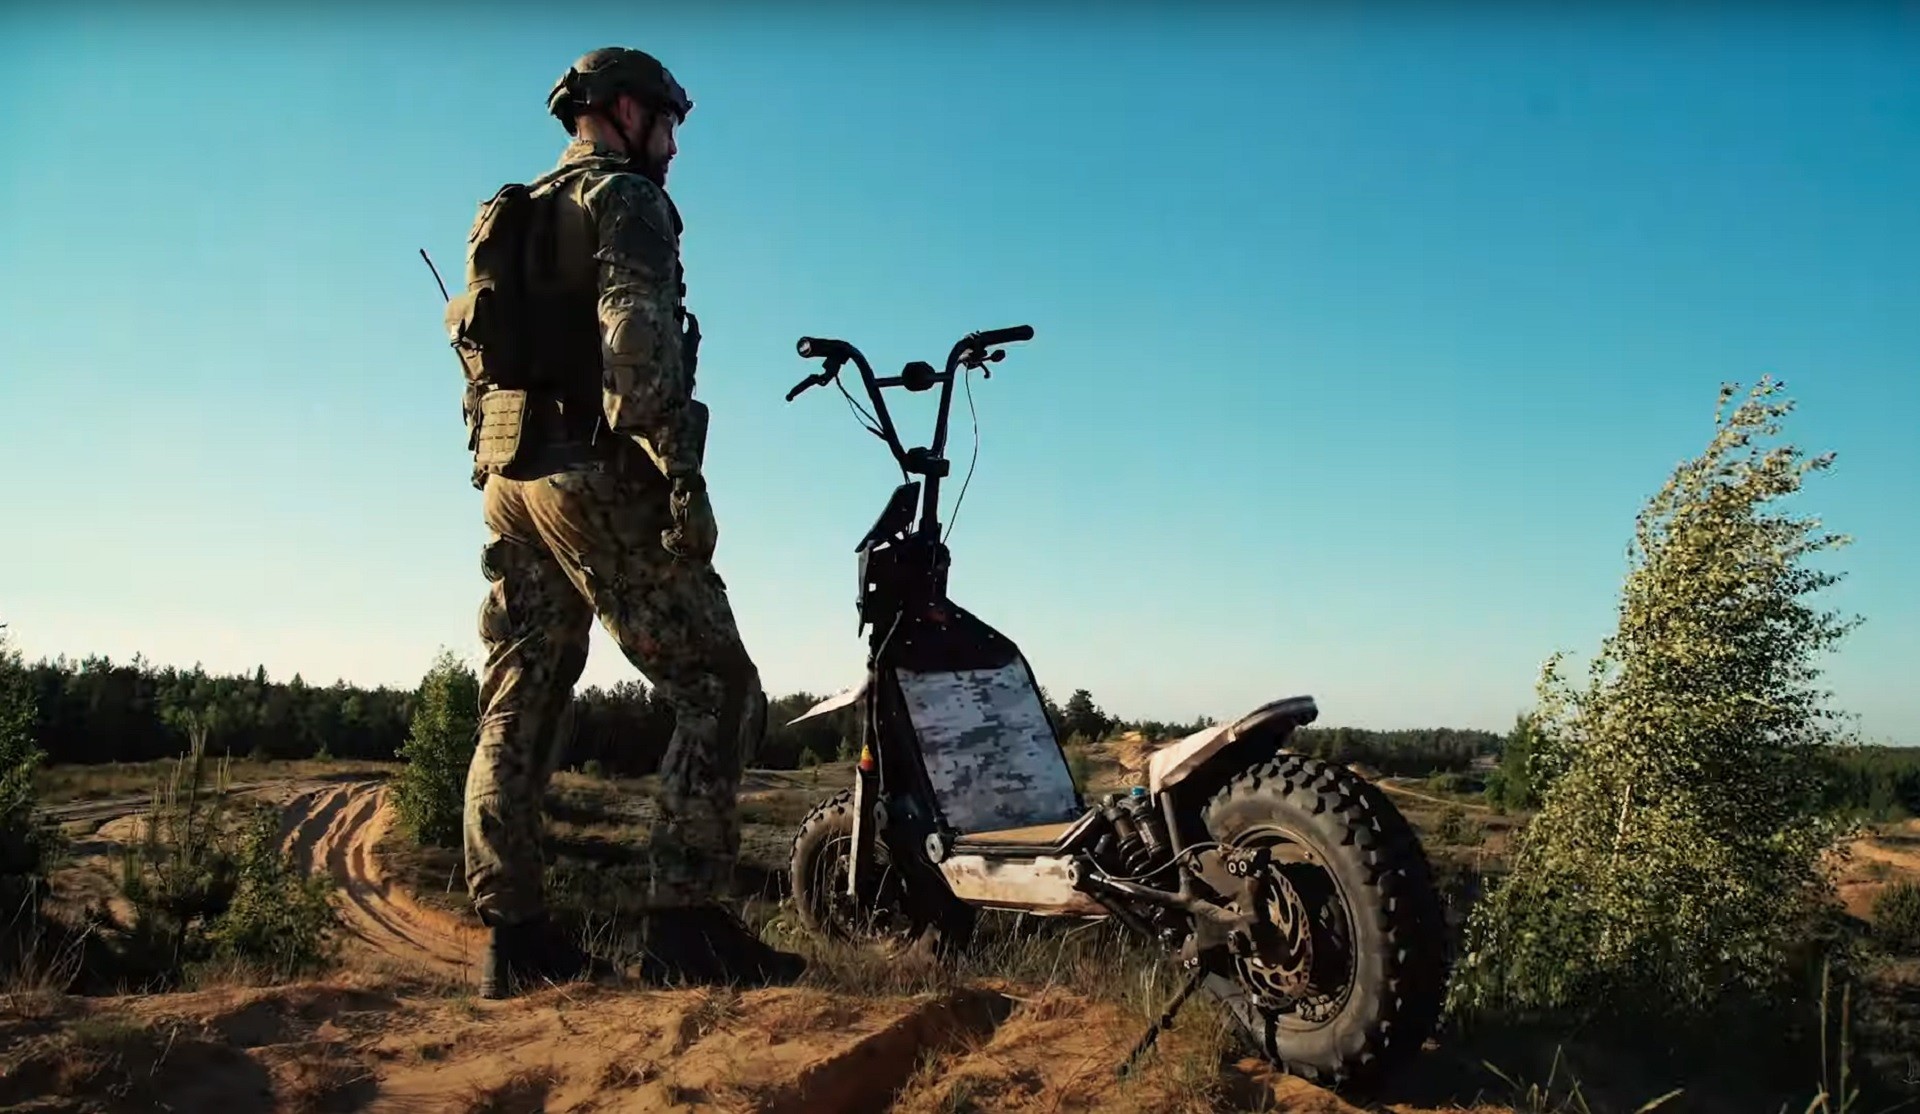 Ukrainian soldiers request more Mosphera electric scooters for reconnaissance and logistics